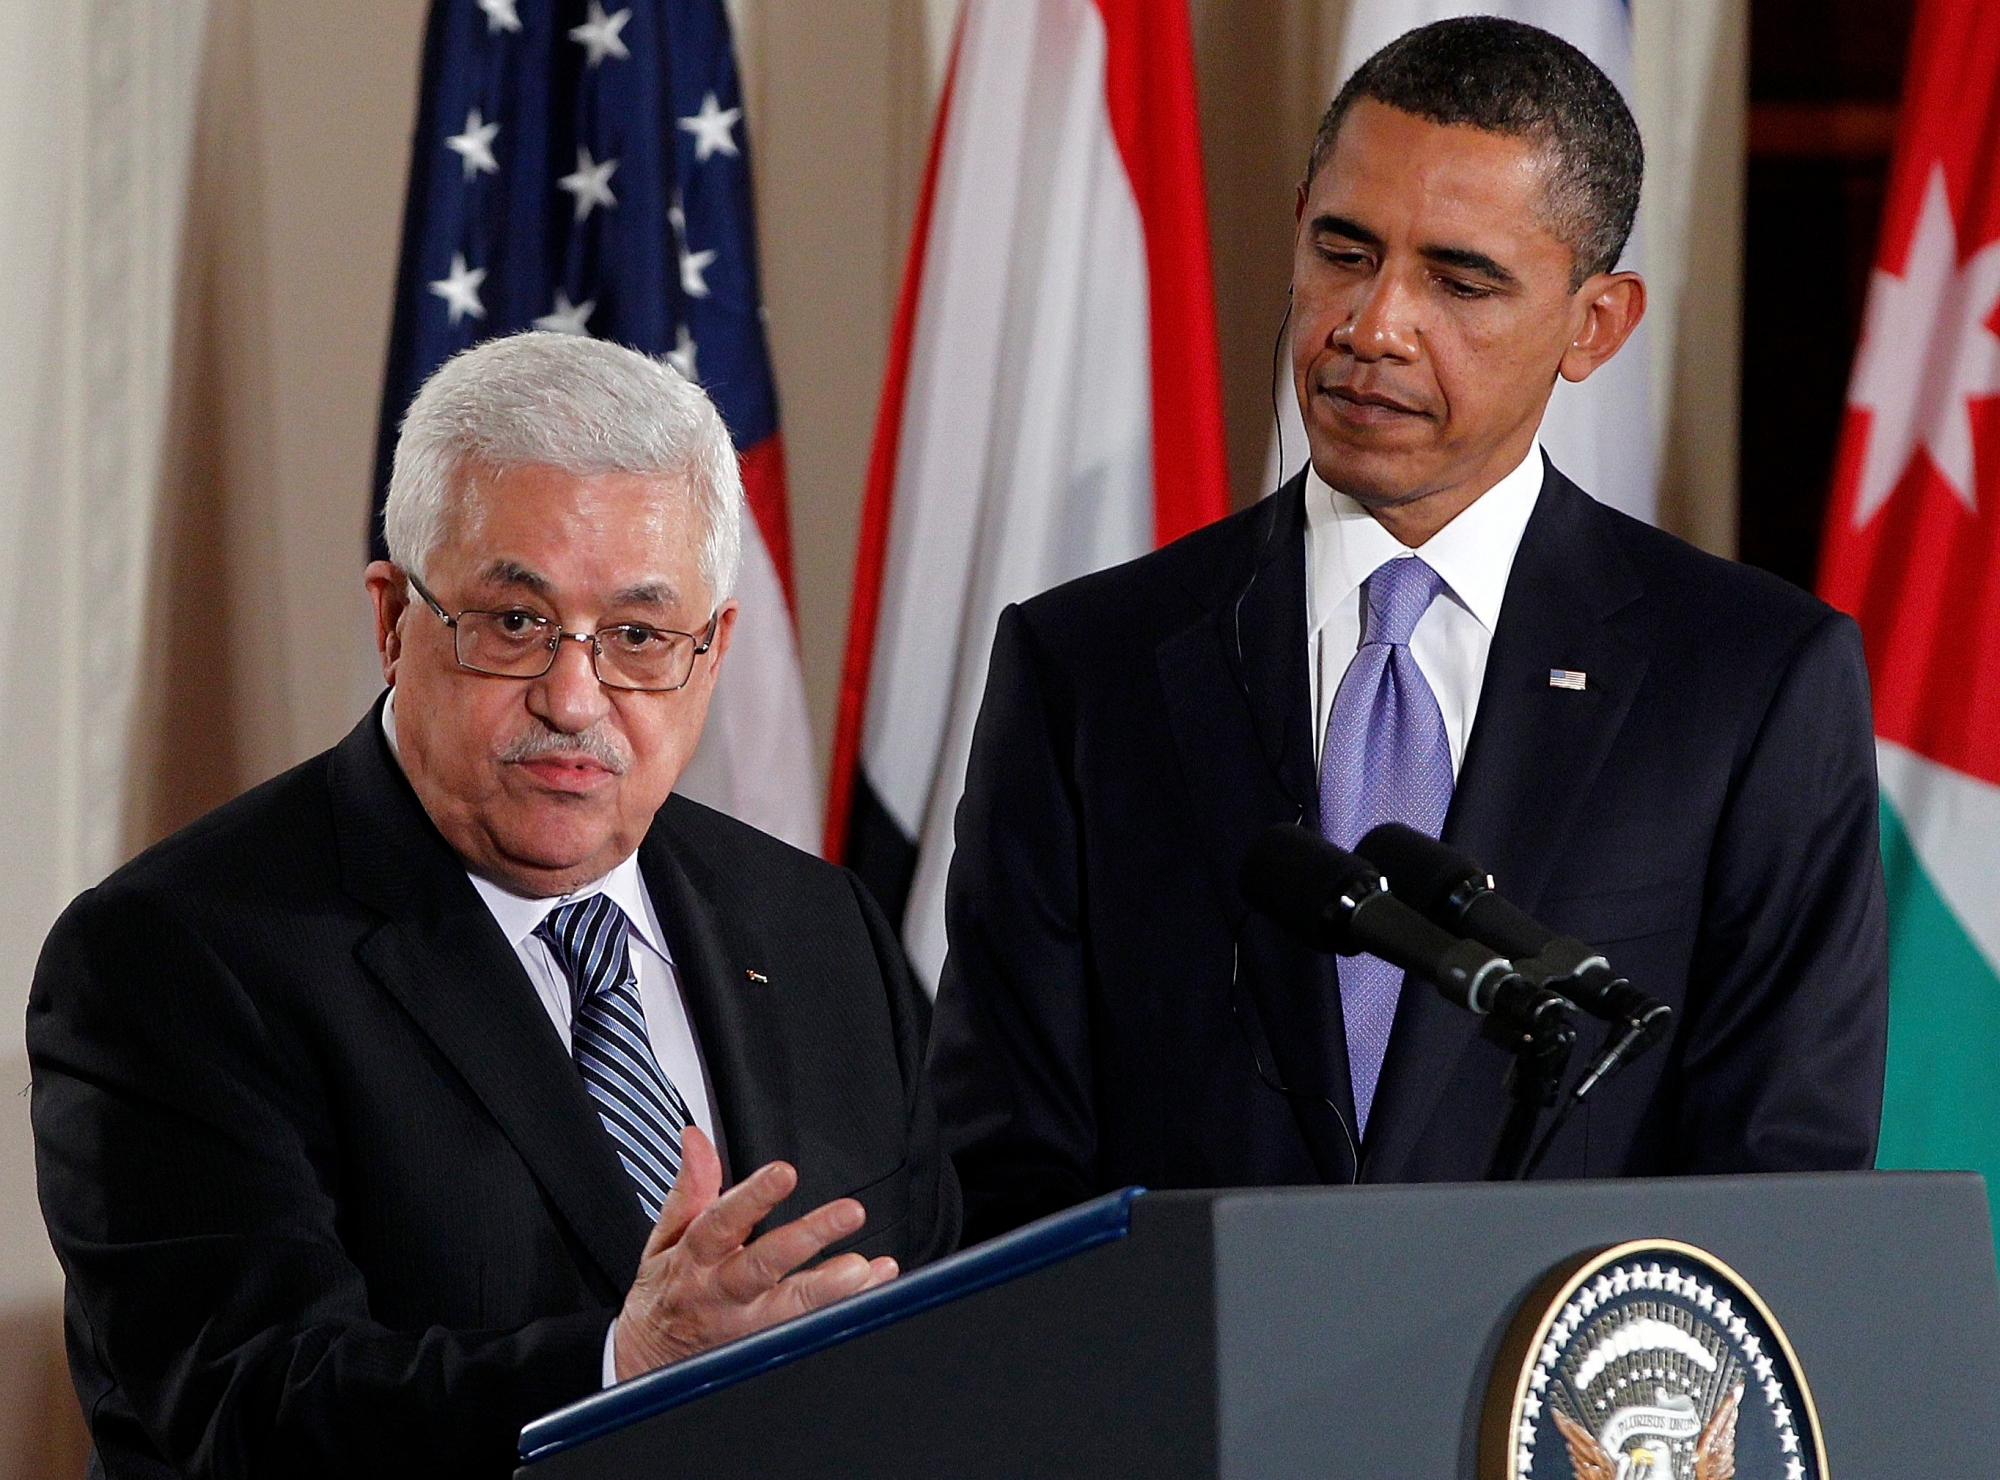 Palestinian President Mahmoud Abbas speaks on the Middle East peace negotiations in the East Room of the White House in Washington as President Barack Obama listens, Wednesday, Sept. 1, 2010. (AP Photo/Charles Dharapak) Obama US  Mideast Talks